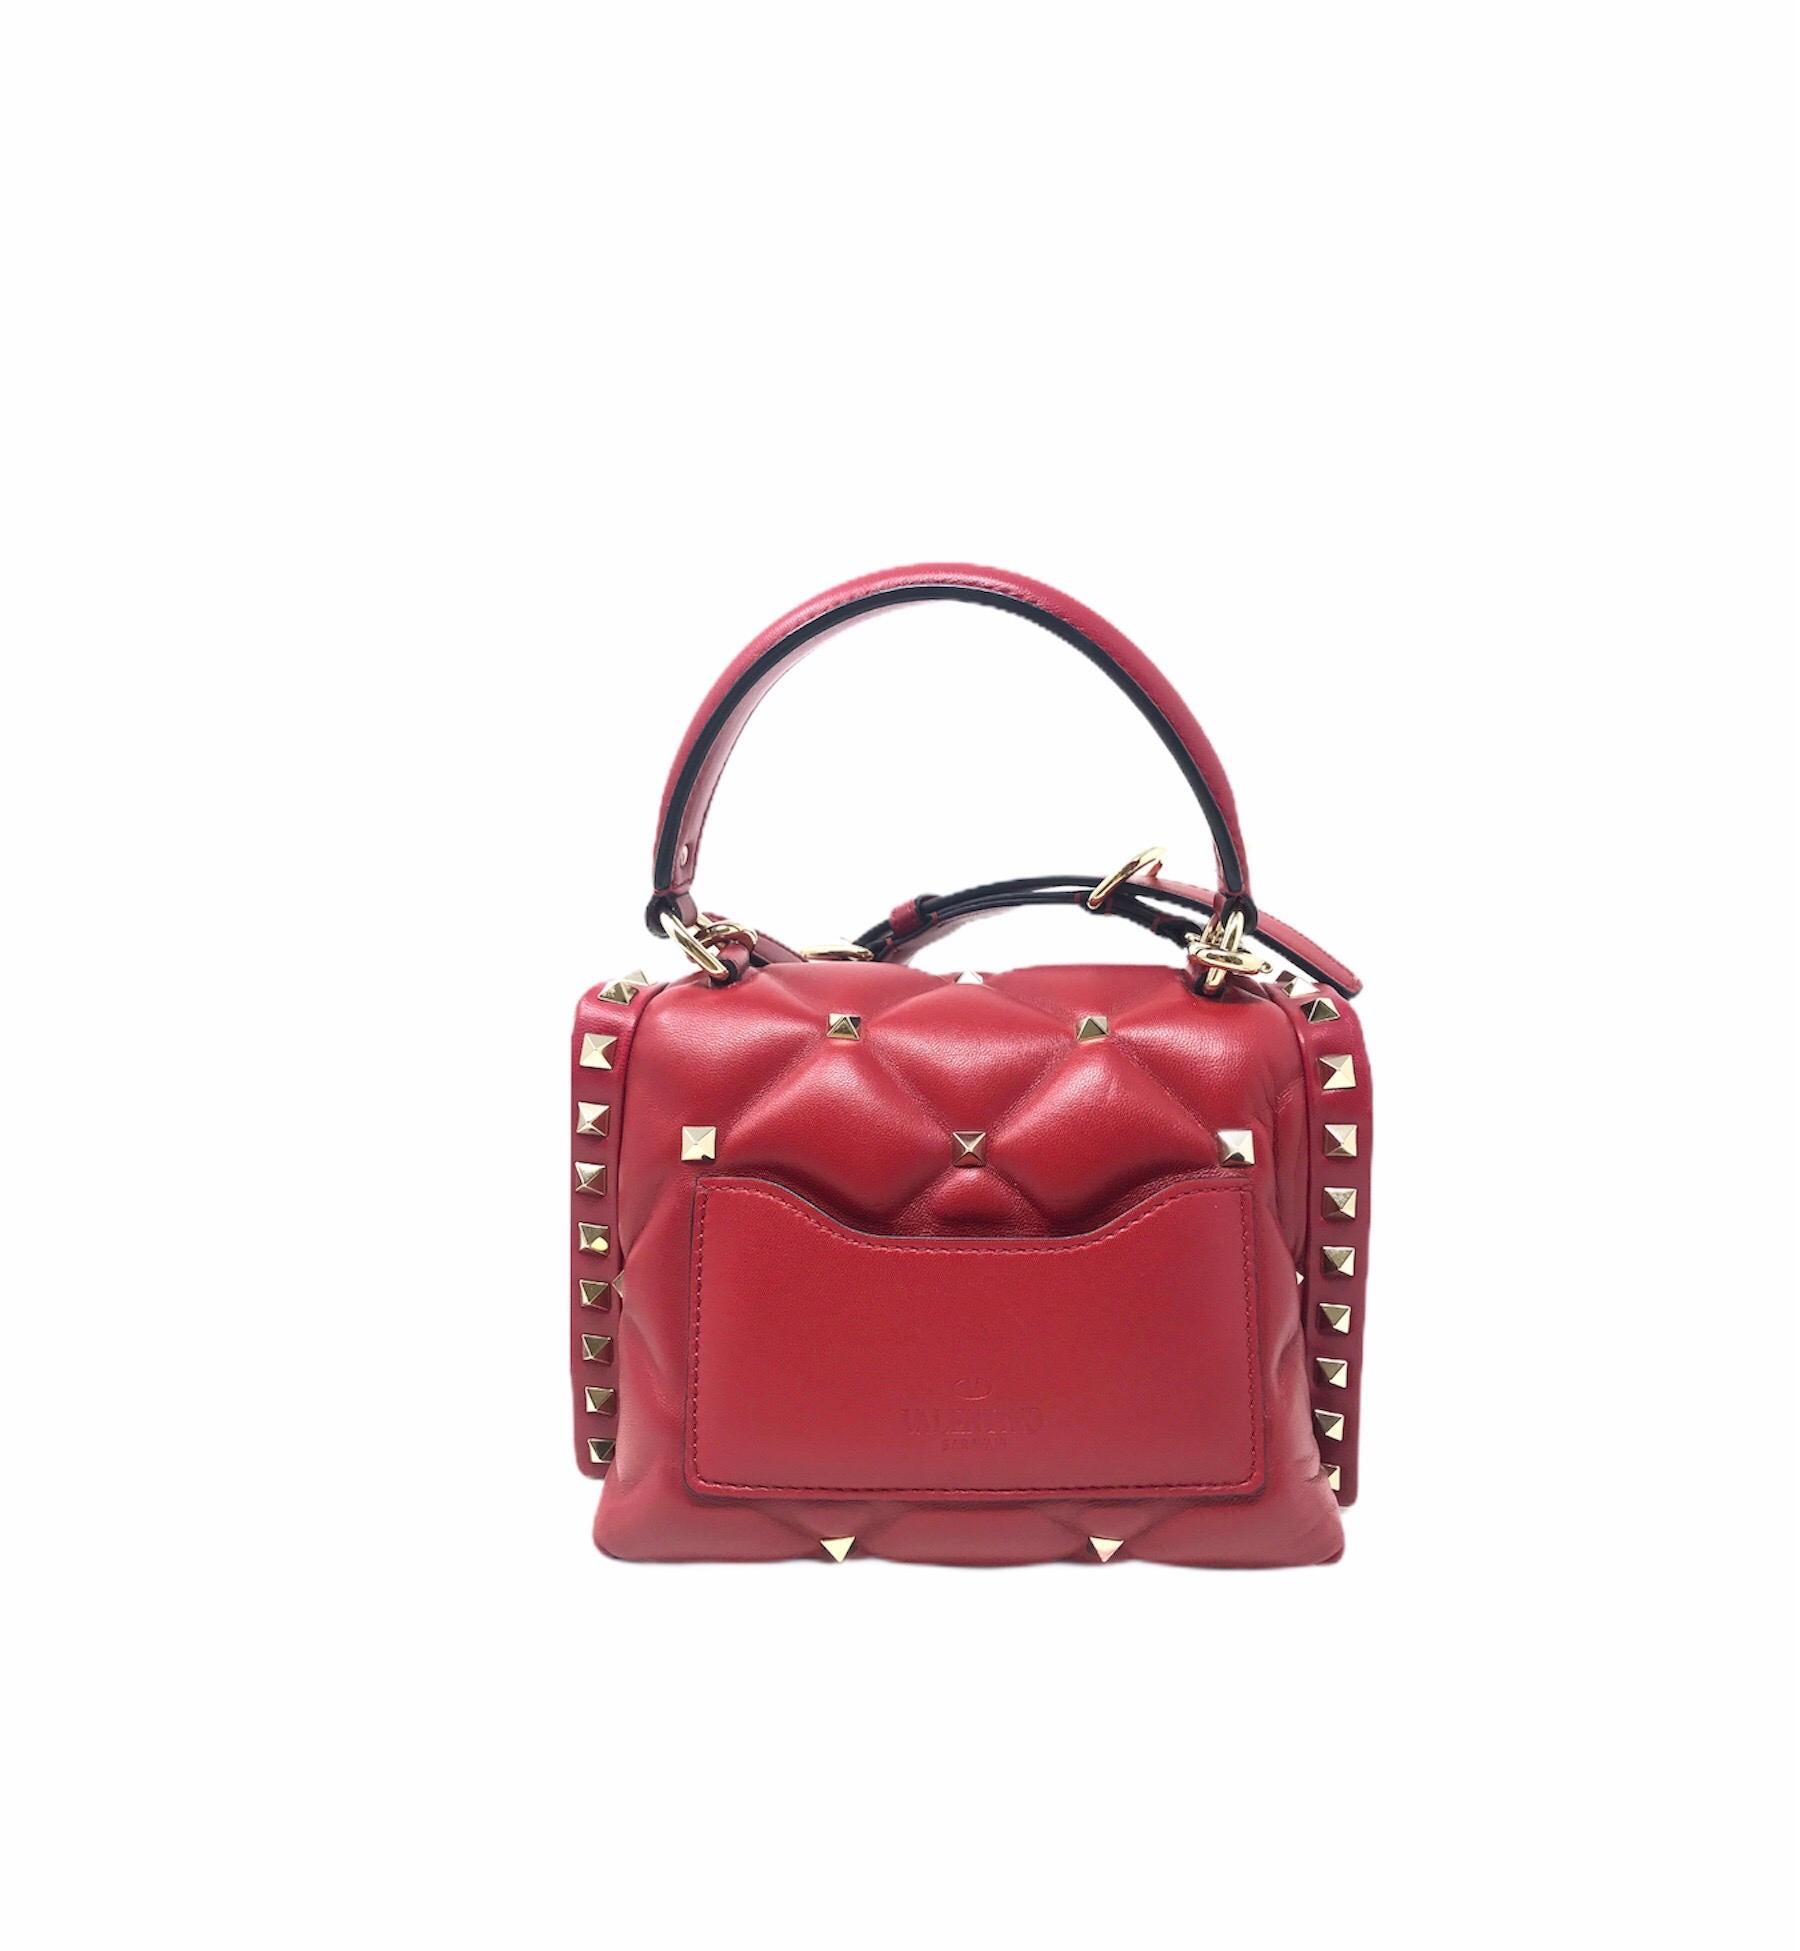 Valentino Garavani Candystud handbag in red soft lamb nappa surrounded by a profile of platinum studs. Tufted diamond pattern decorated with iconic studs.
- Studs and metal parts platinum finish
- Swivel closure covered in leather
- Adjustable and